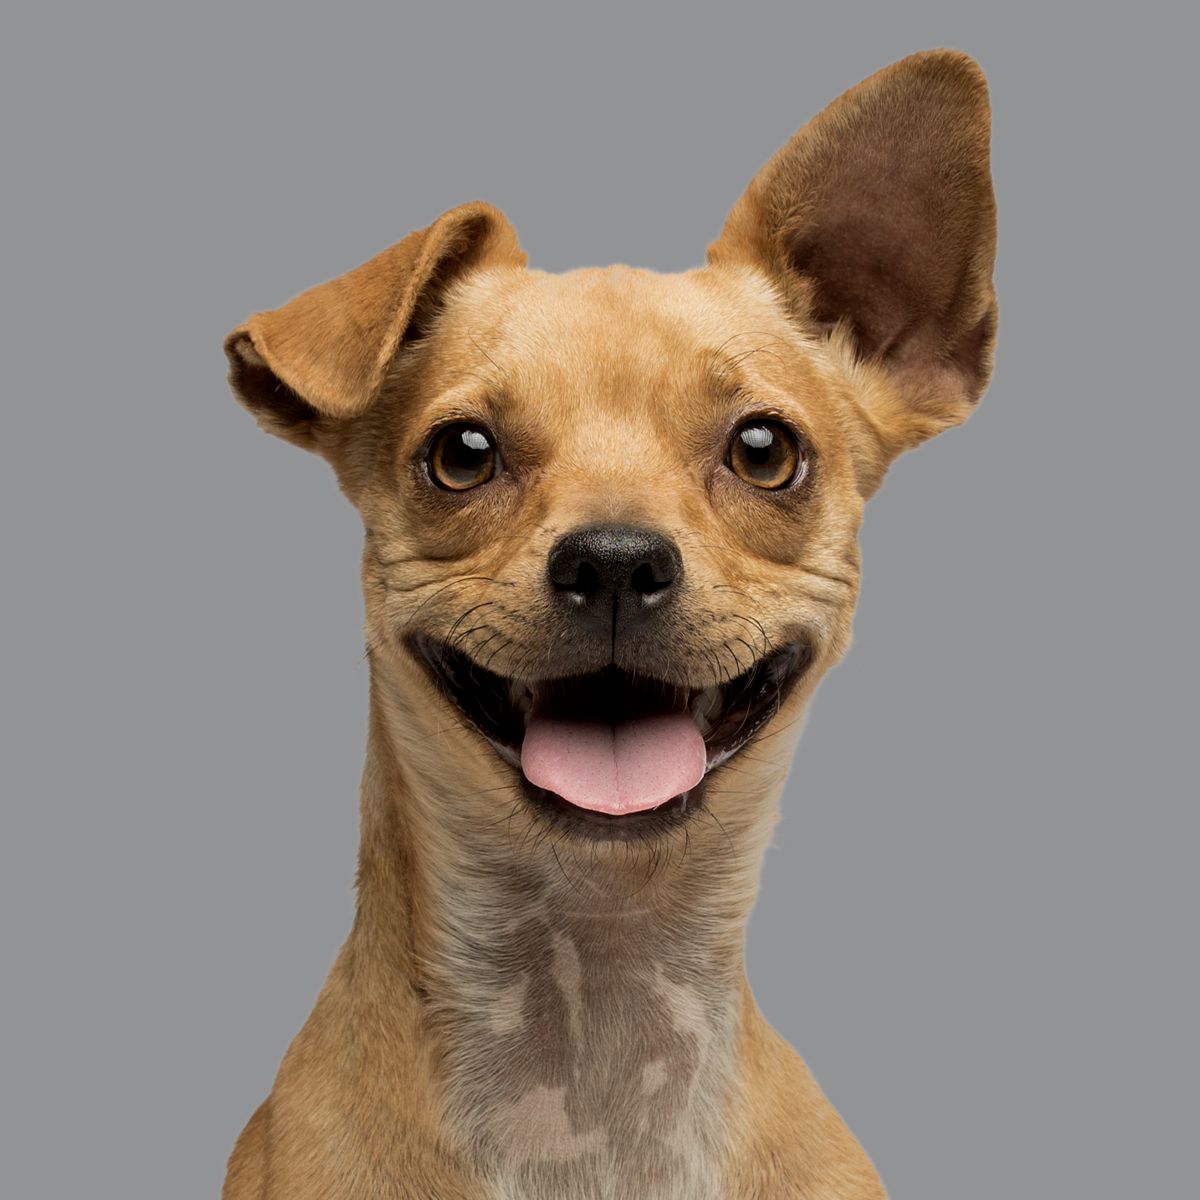 A smiling dog with one ear flopped down and the other ear pointed up.